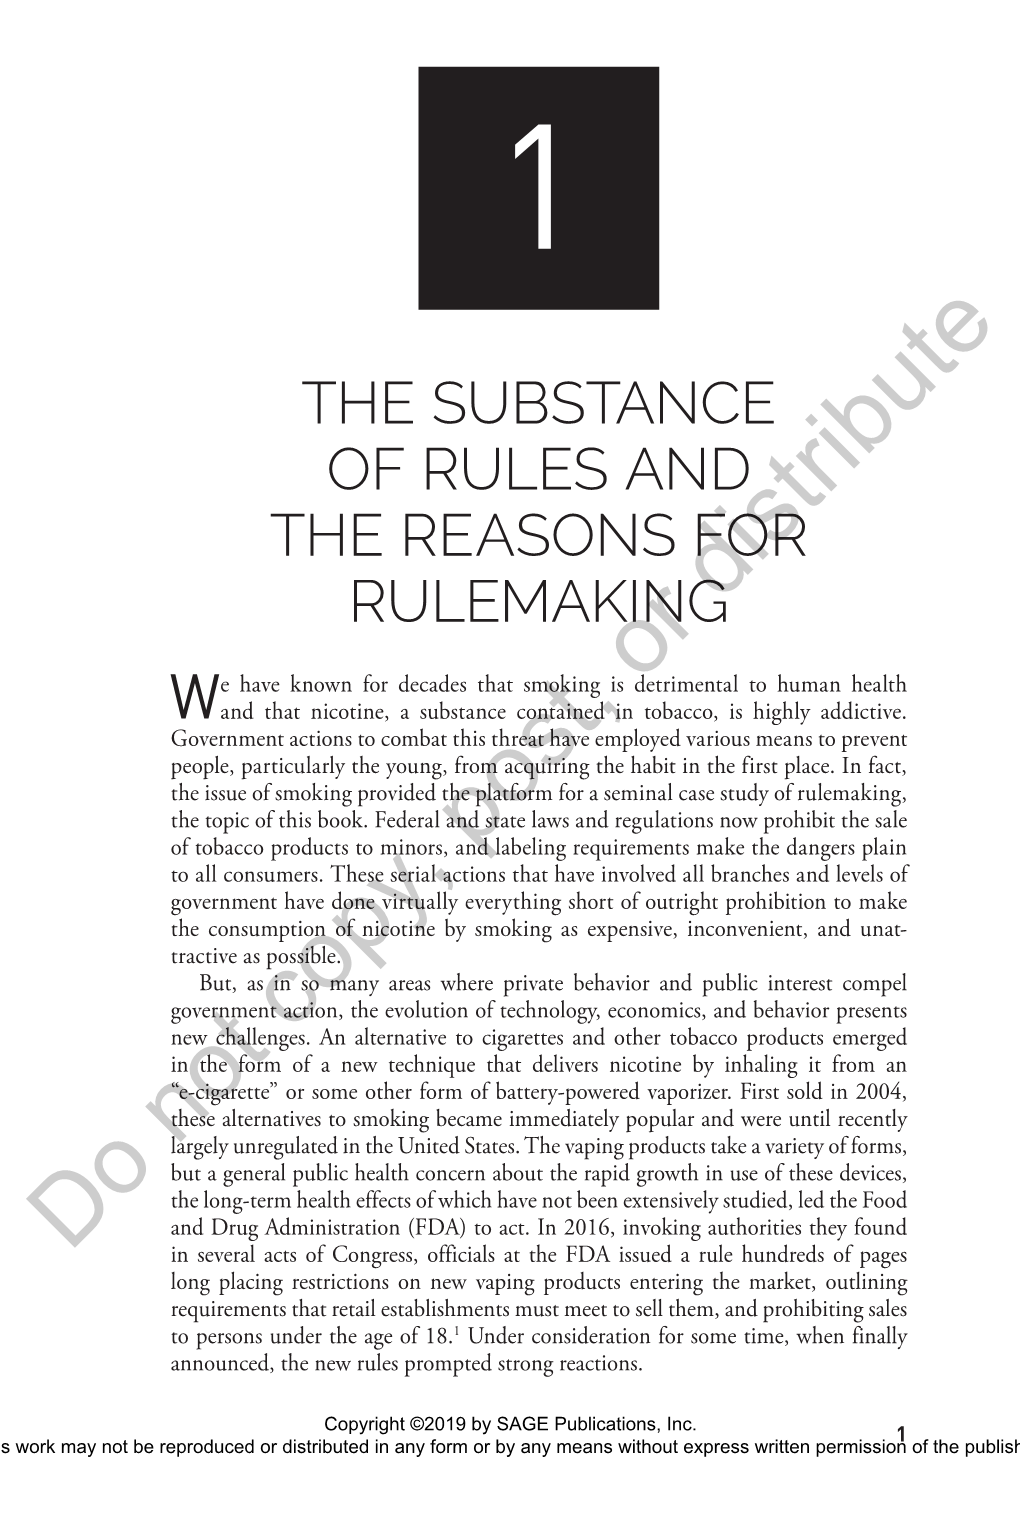 Chapter 1: the Substance of Rules and the Reasons for Rulemaking